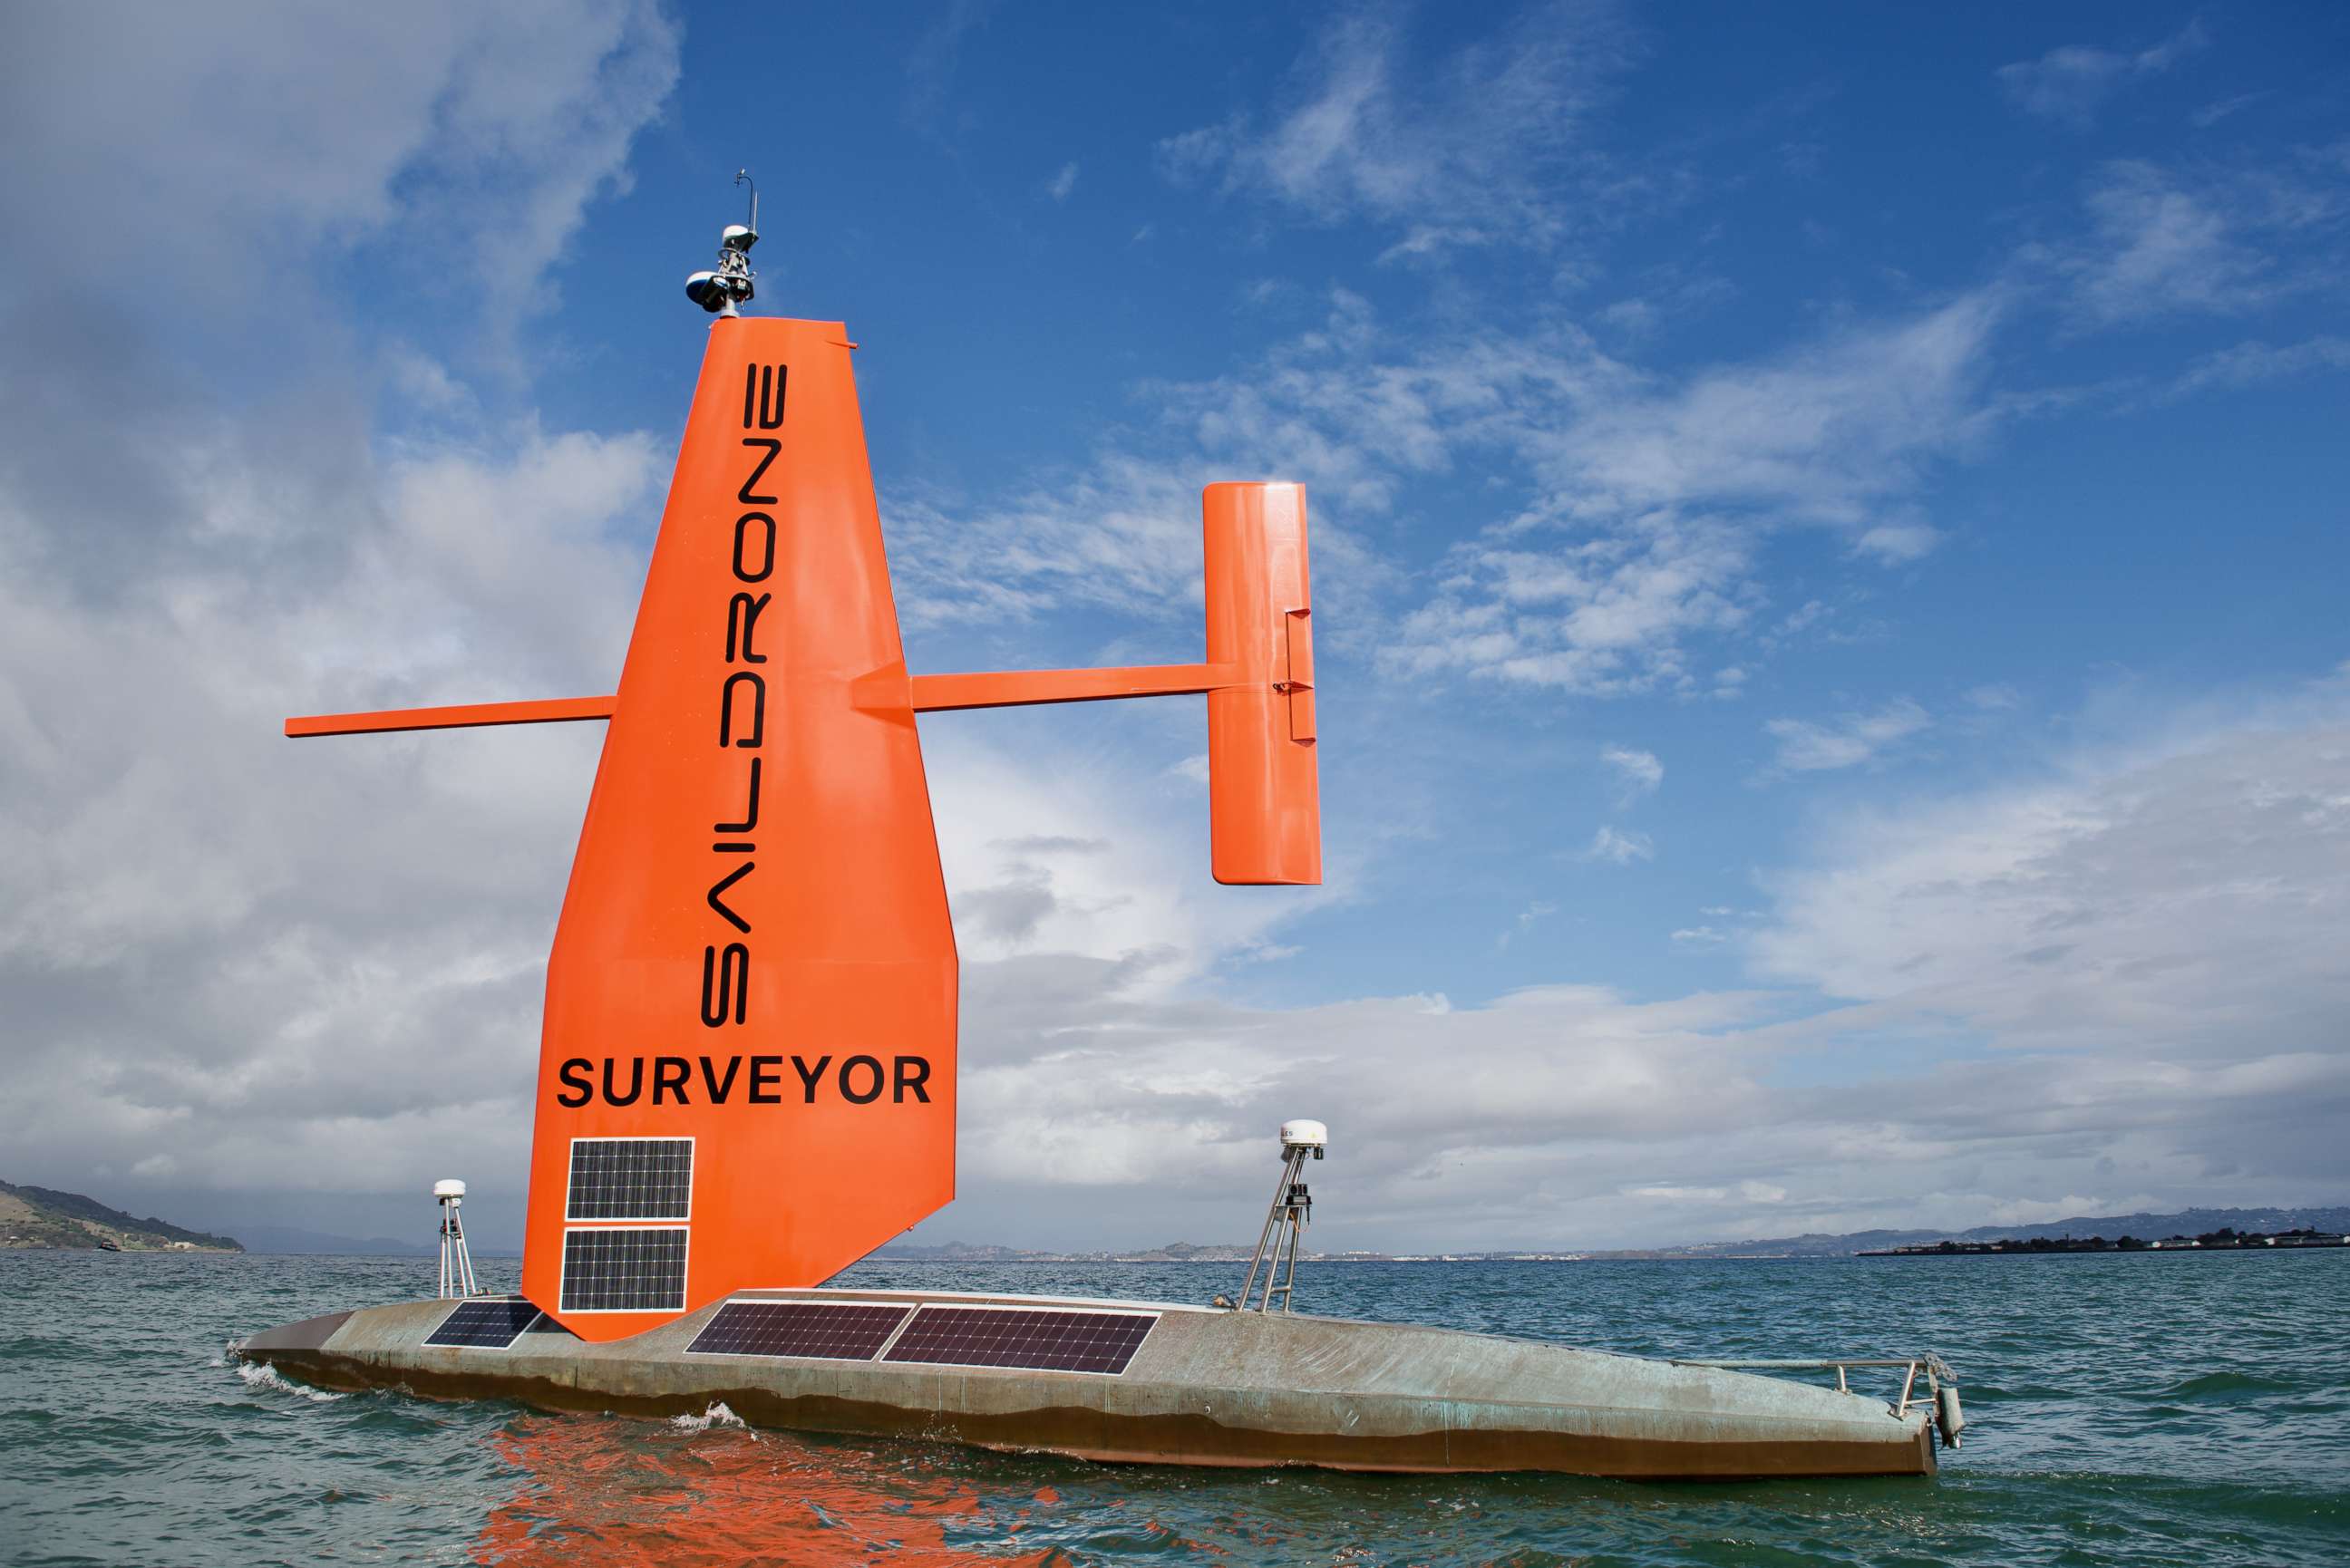 PHOTO: The Saildrone Surveyor is pictured during sea trials in the San Francisco Bay, in an undated handout photo.